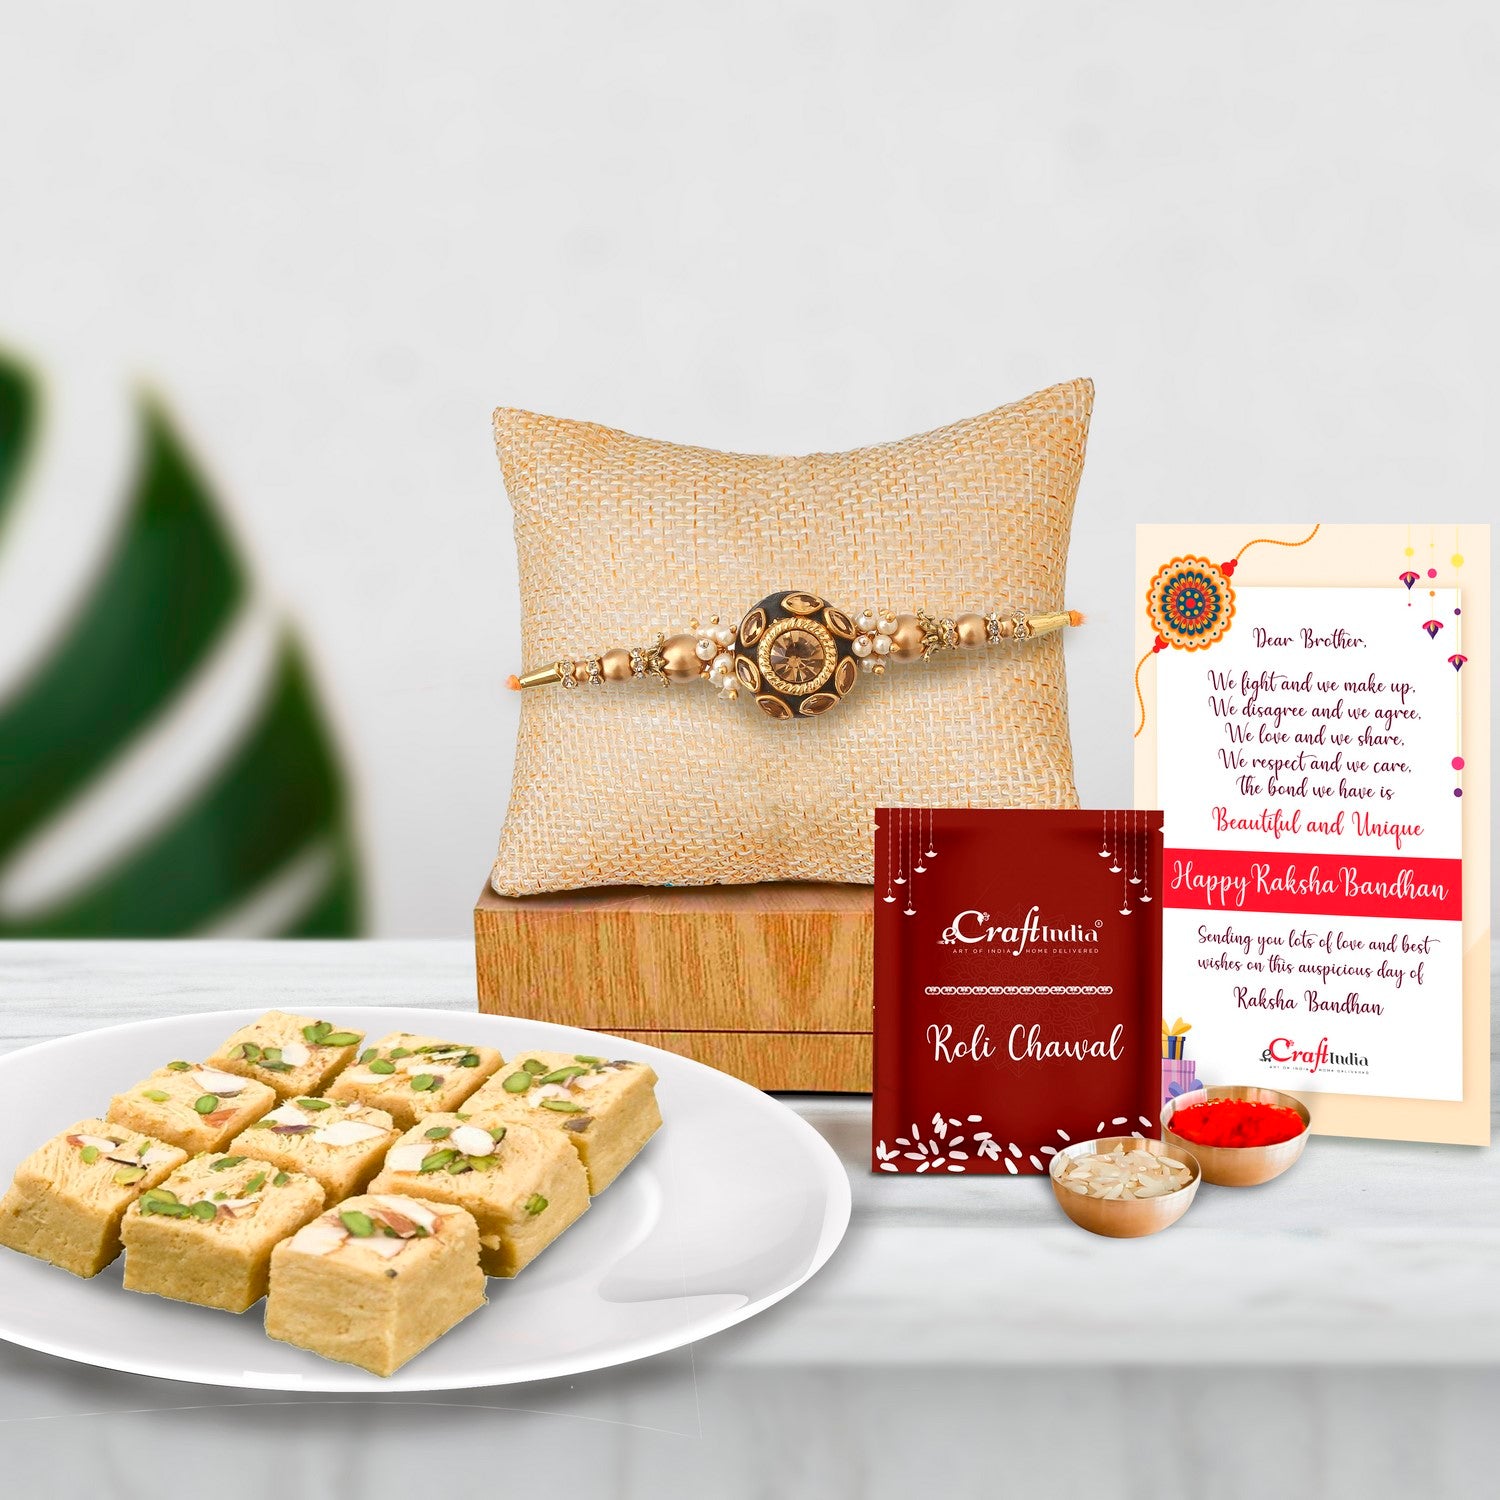 Designer Rakhi with Soan Papdi (500 Gm) and Roli Chawal Pack, Best Wishes Greeting Card